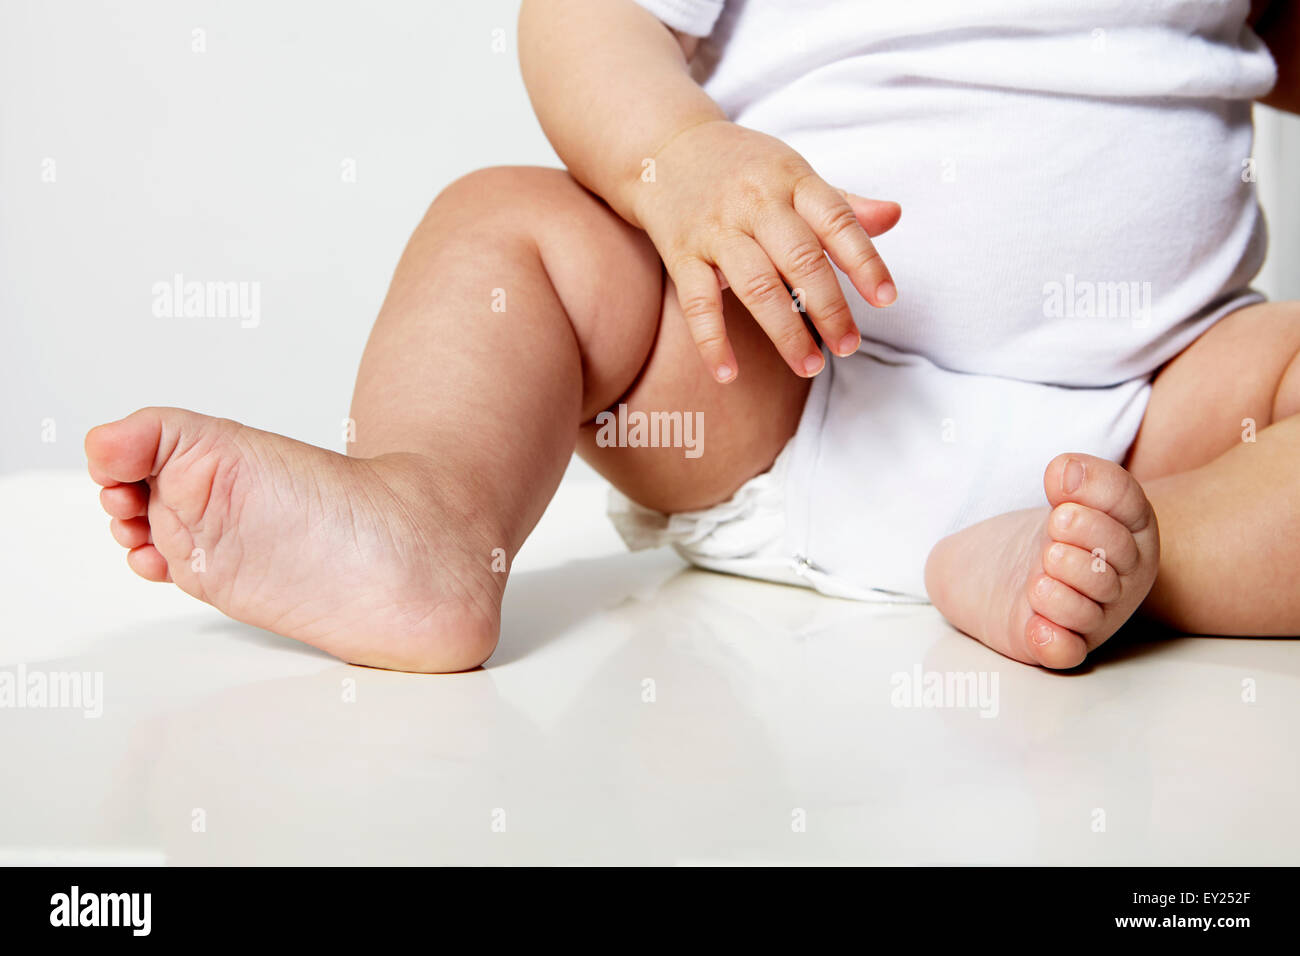 Baby's legs, low section Stock Photo